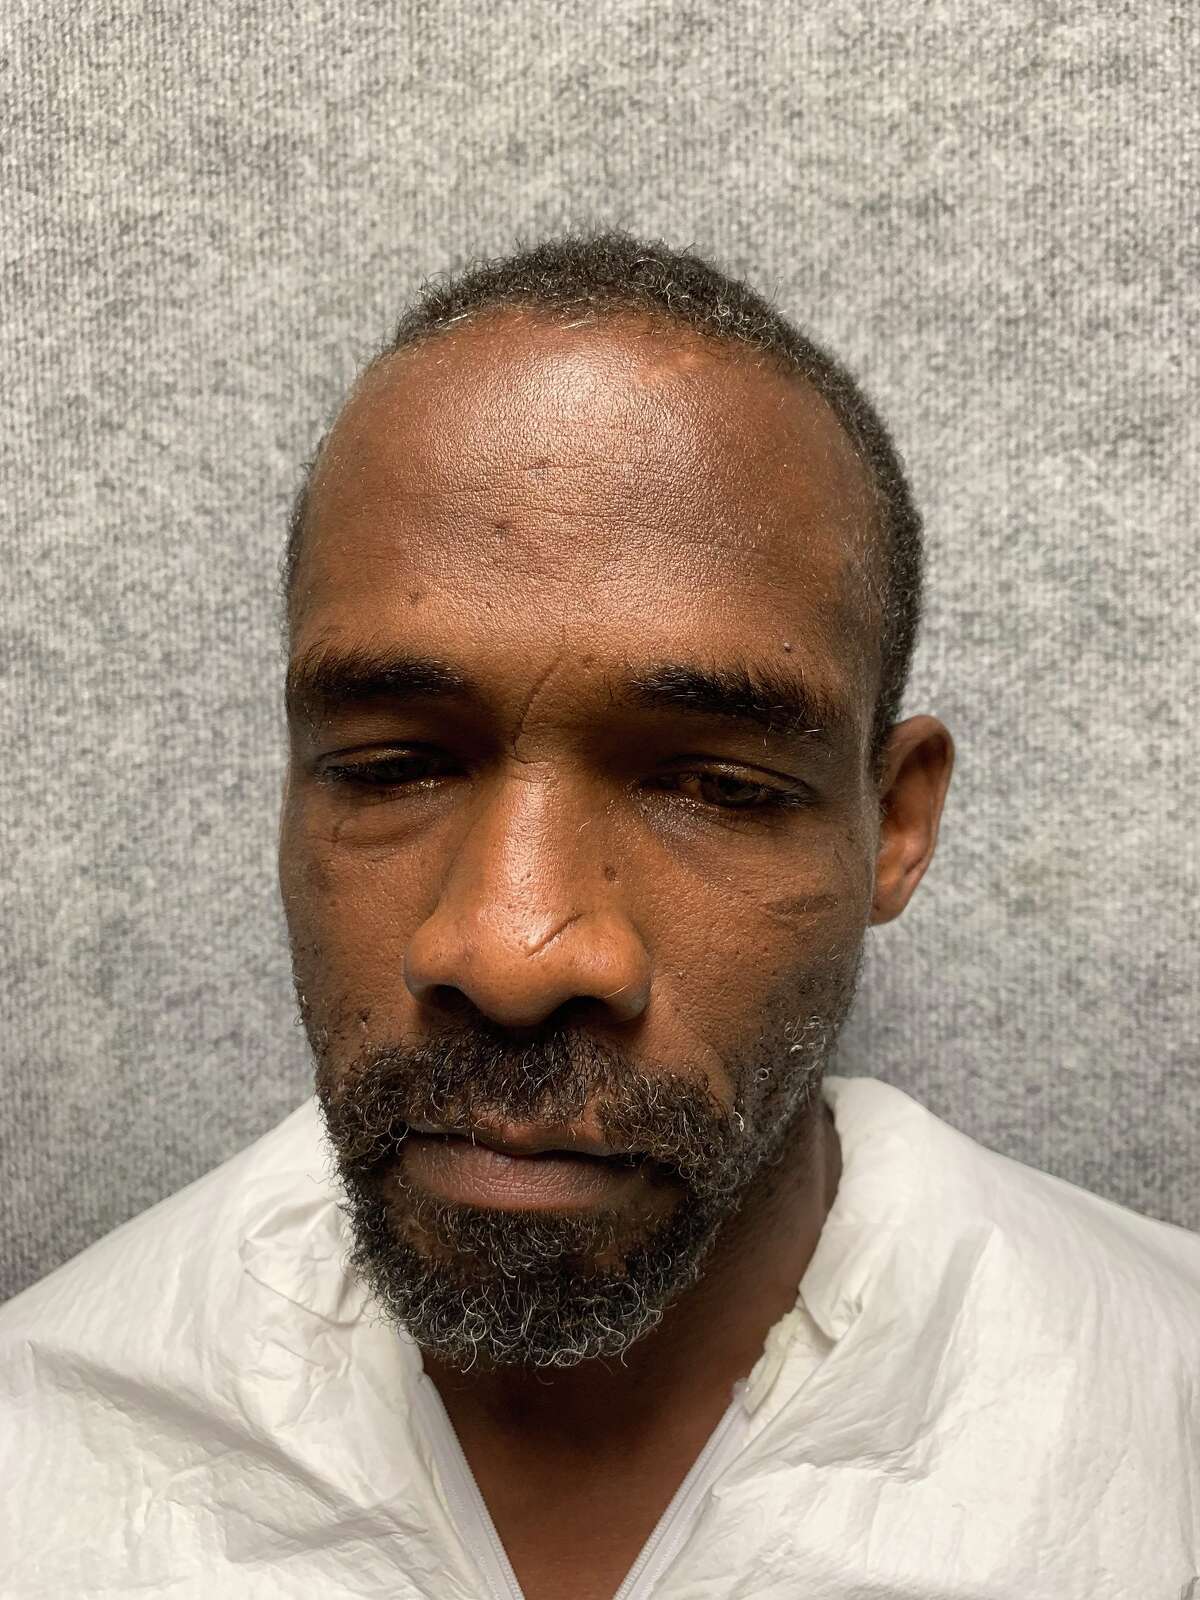 San Antonio police say Richard Lawson, 44, was arrested on a murder warrant in connection to the stabbing death of Marcus McGee-Sims, 26, on Monday, Sept. 23, 2019.